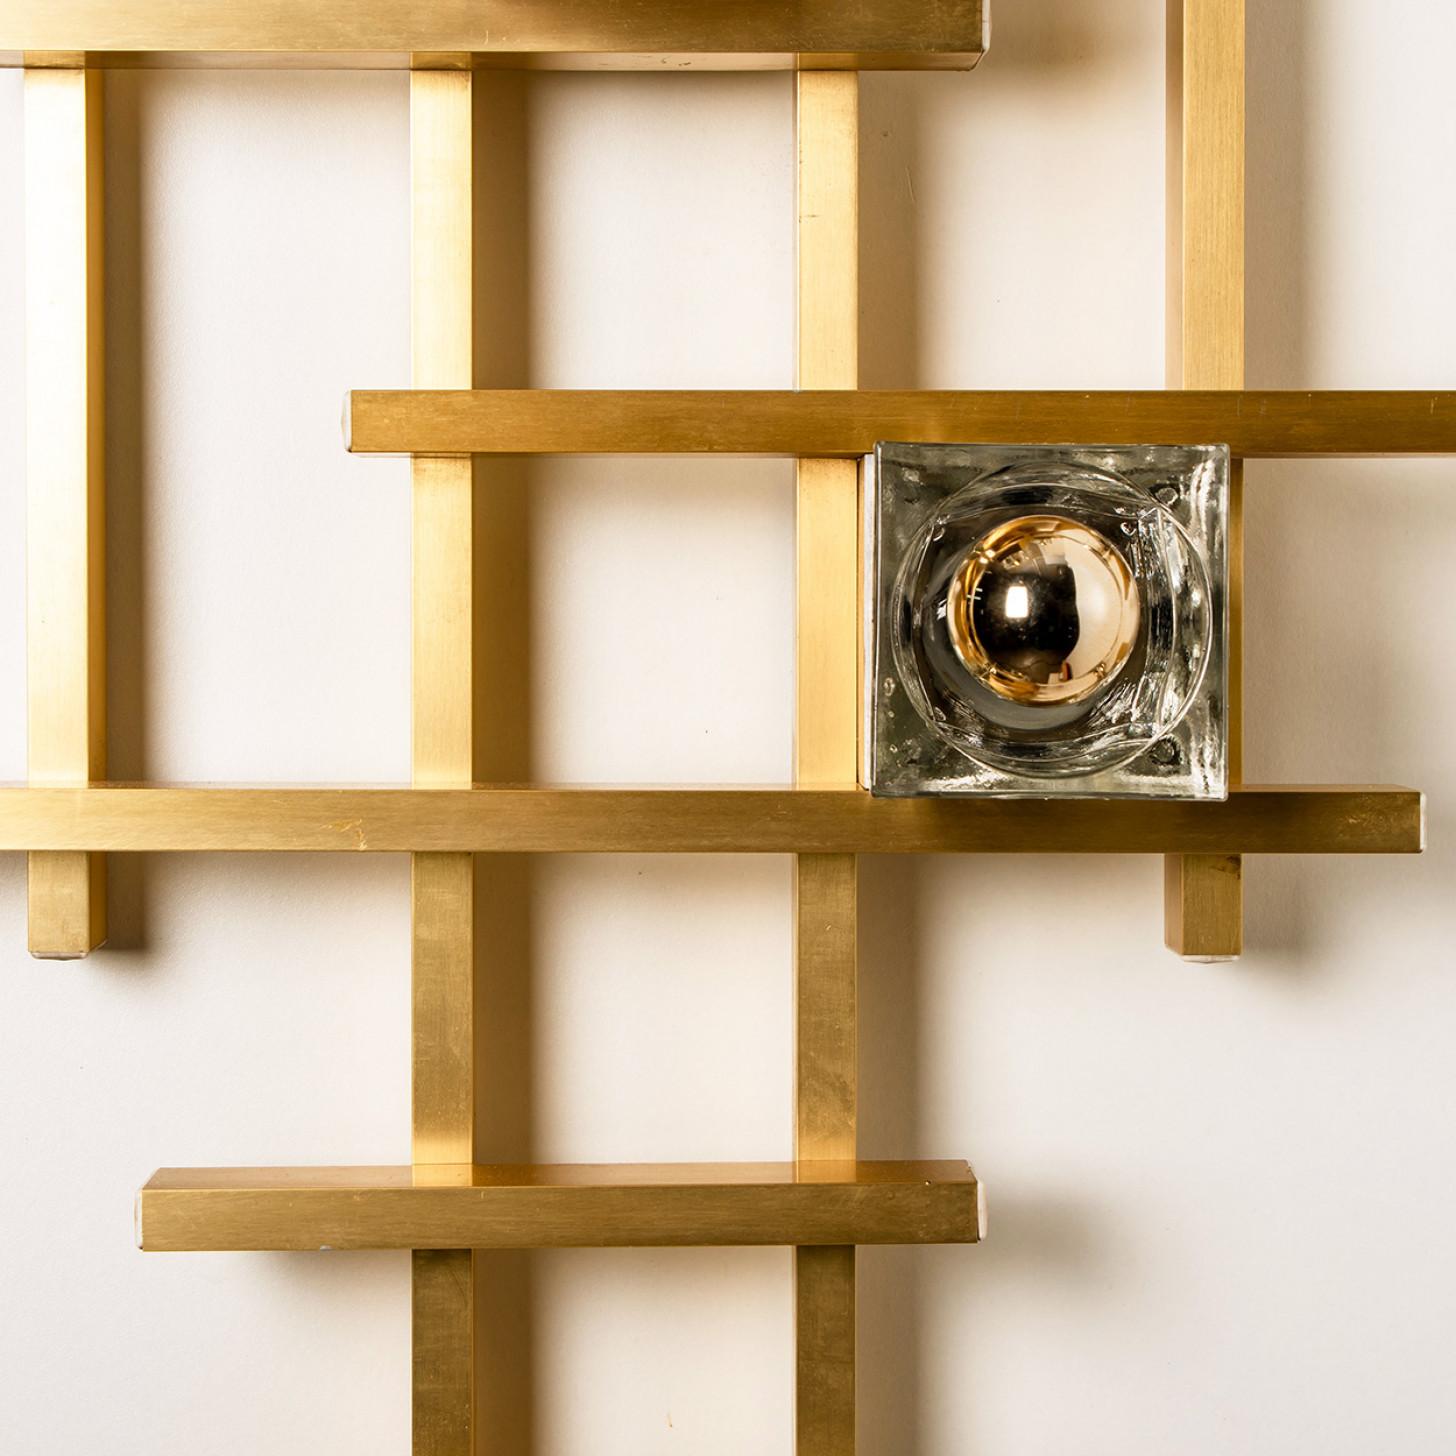 Large geometric brass wall sconce made by Geatano Sciolari around 1960-1970. A sculptural piece from the Cubic design with 5 light fixtures.

A wonderful sconce for collectors or as a decorative item for interior designers.
The supports for the